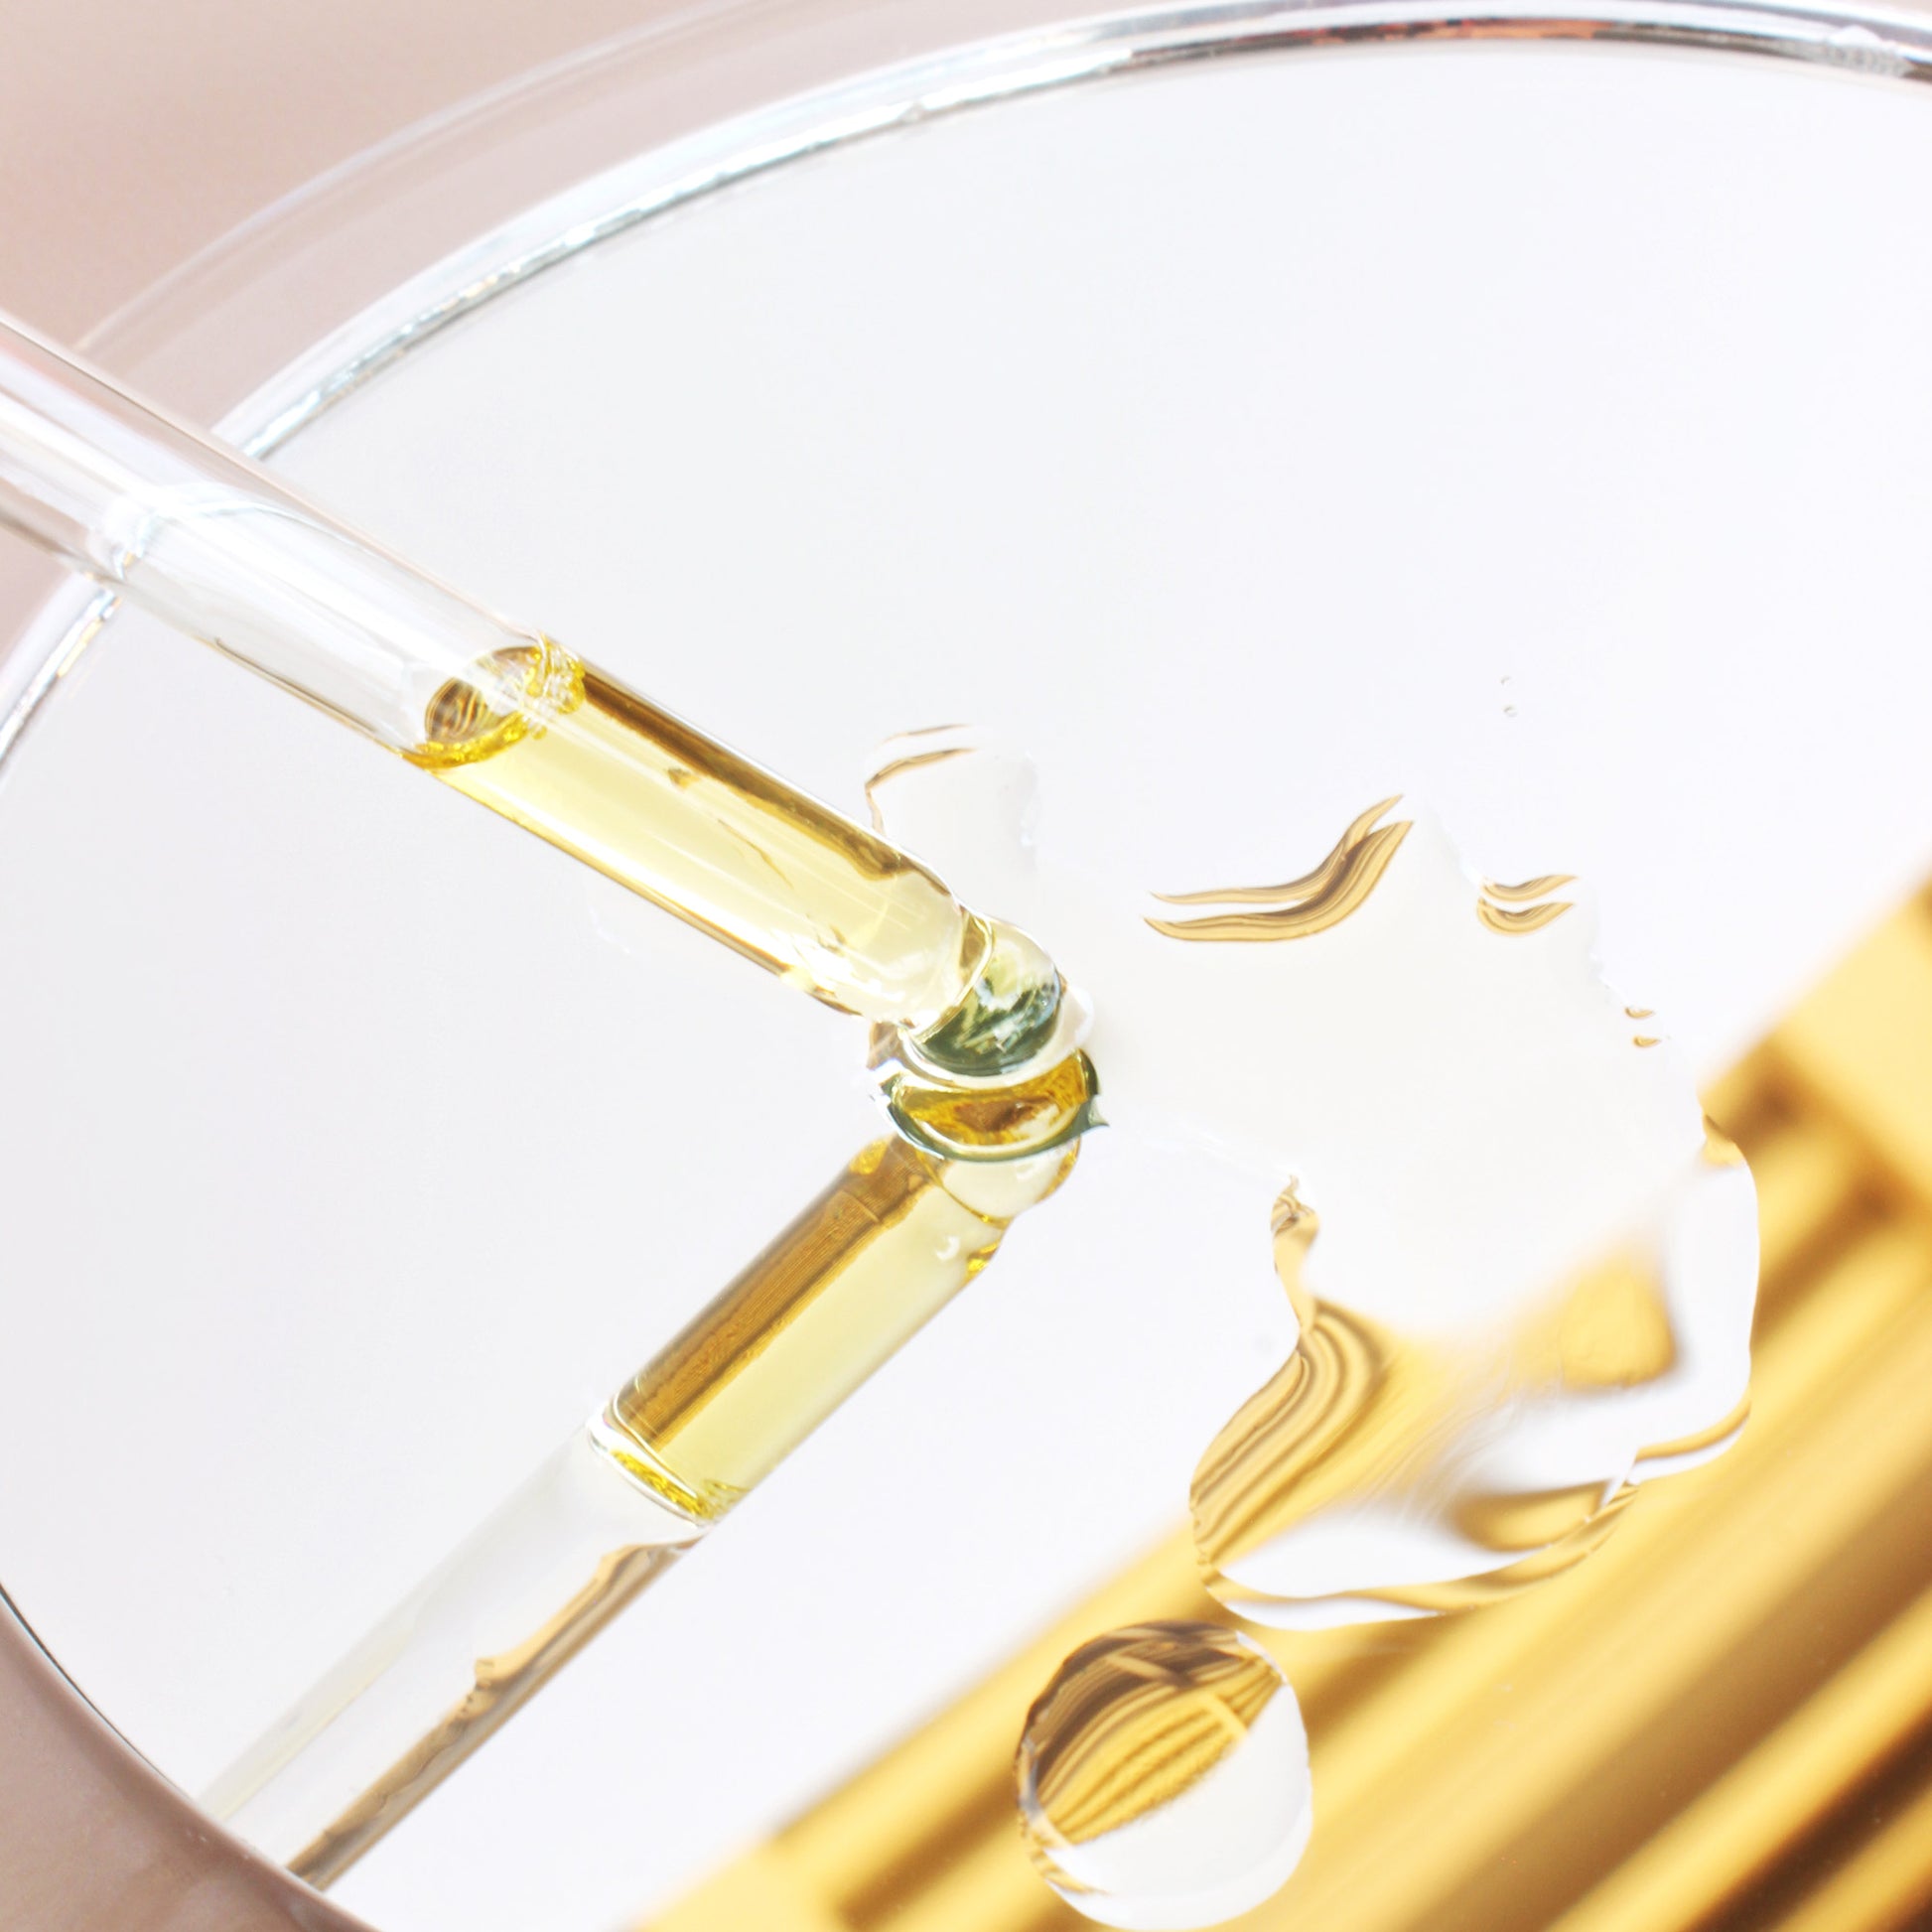 Pure Golden Jojoba Oil Close Up Showing Glass Dropper with Oil Droplets on Glass Petri Dish